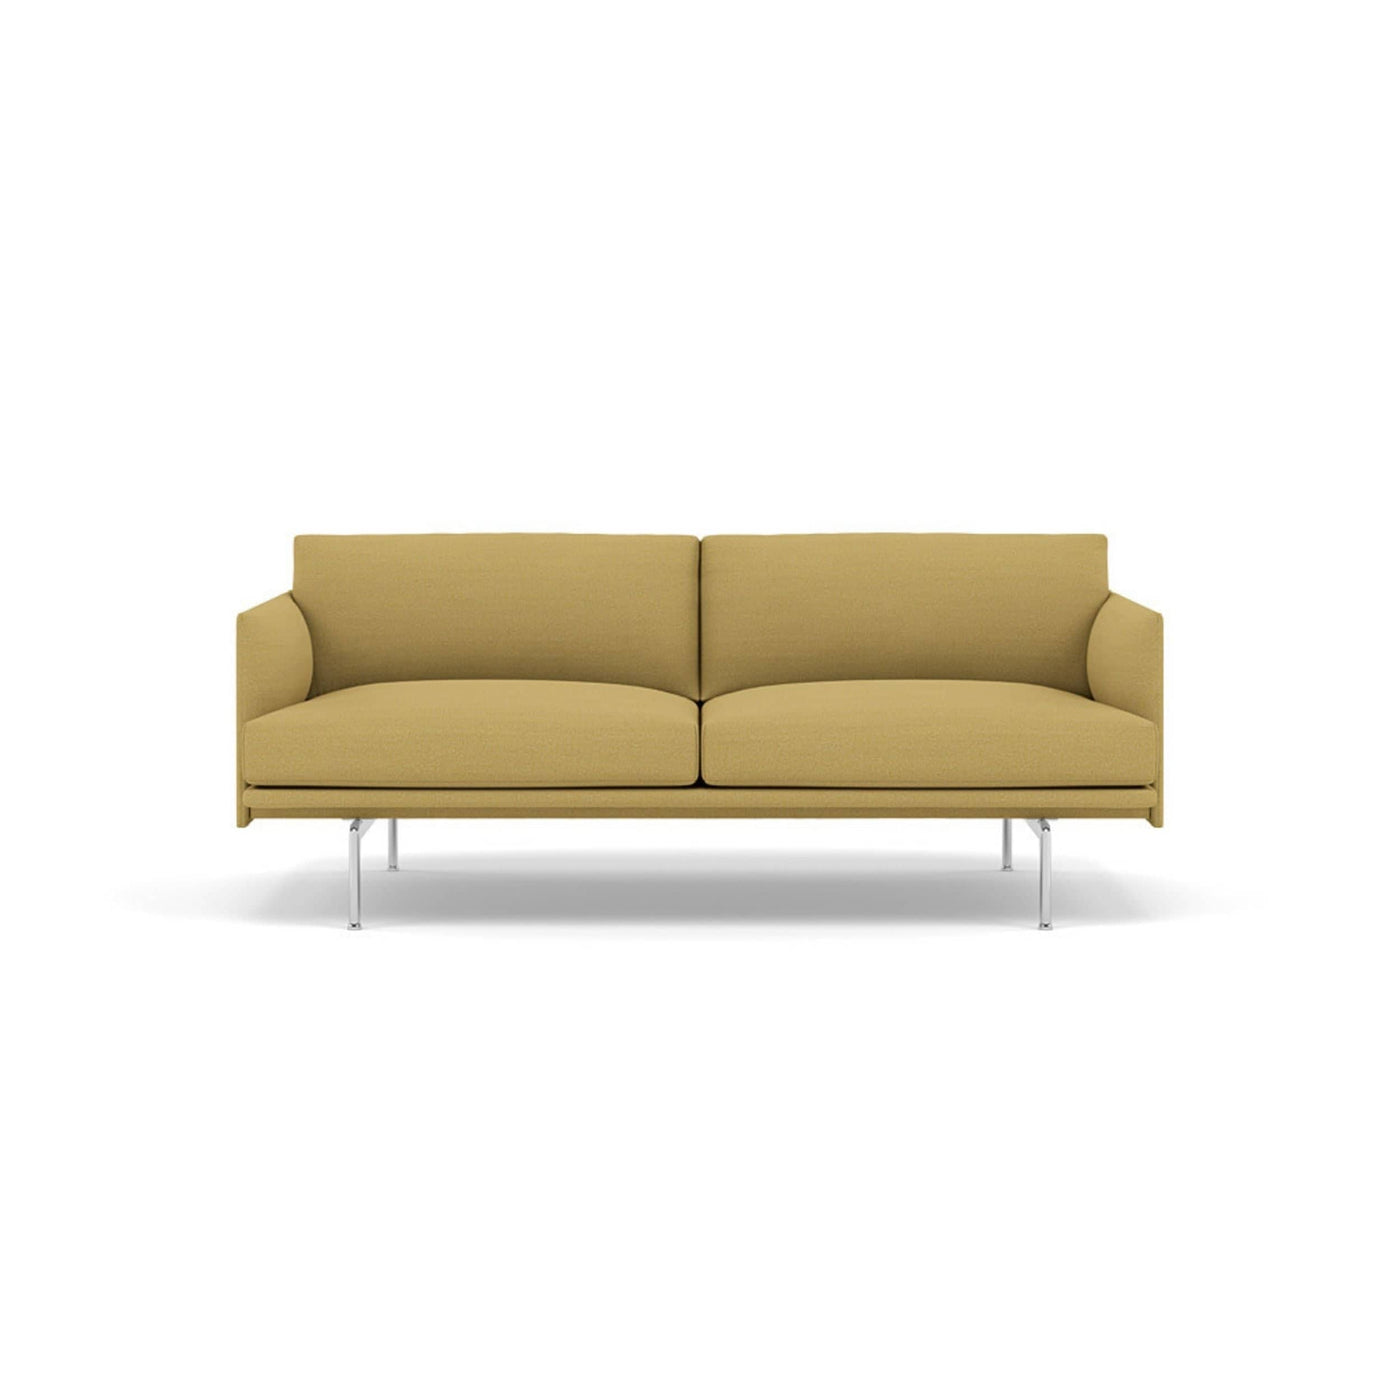 muuto outline 2 seater sofa in hallingdal 407 yellow fabric and polished aluminium legs. Made to order from someday designs. #colour_hallingdal-407